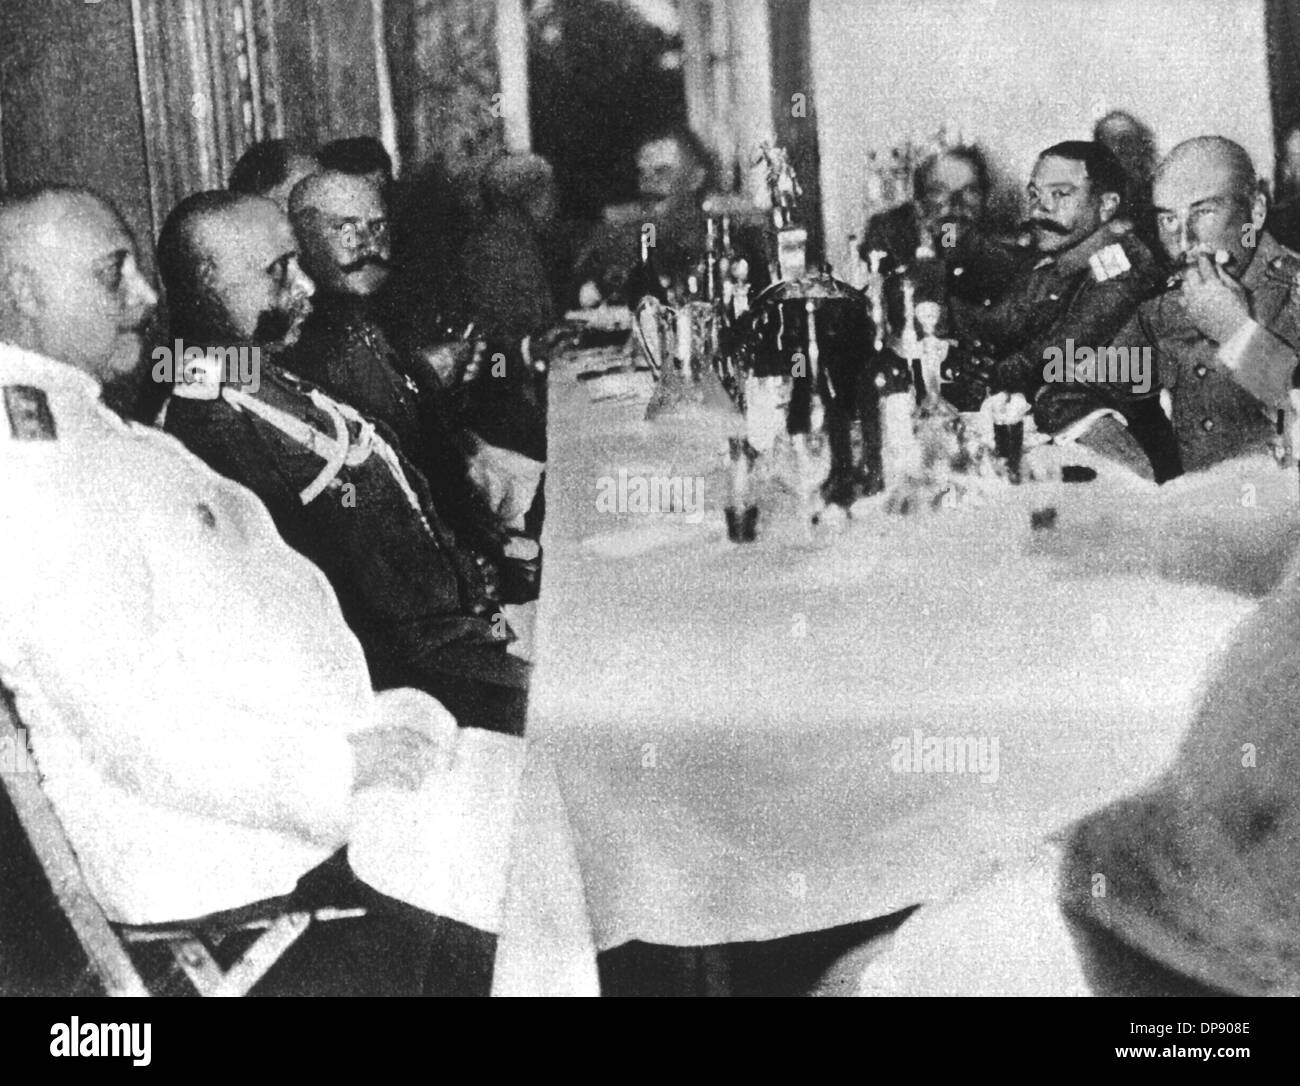 Russian general Paul Edler von Rennenkampf (2nd of left), chief of the Neman army, has breakfast with his headquarters personnel in a hotel in Insterburg (East Prussia) after the outbreak of World War I in 1914. He is blamed for the devastating defeat of the Russian Narew and Neman army at the Battle of Tannenberg at the end of August in 1914. Stock Photo